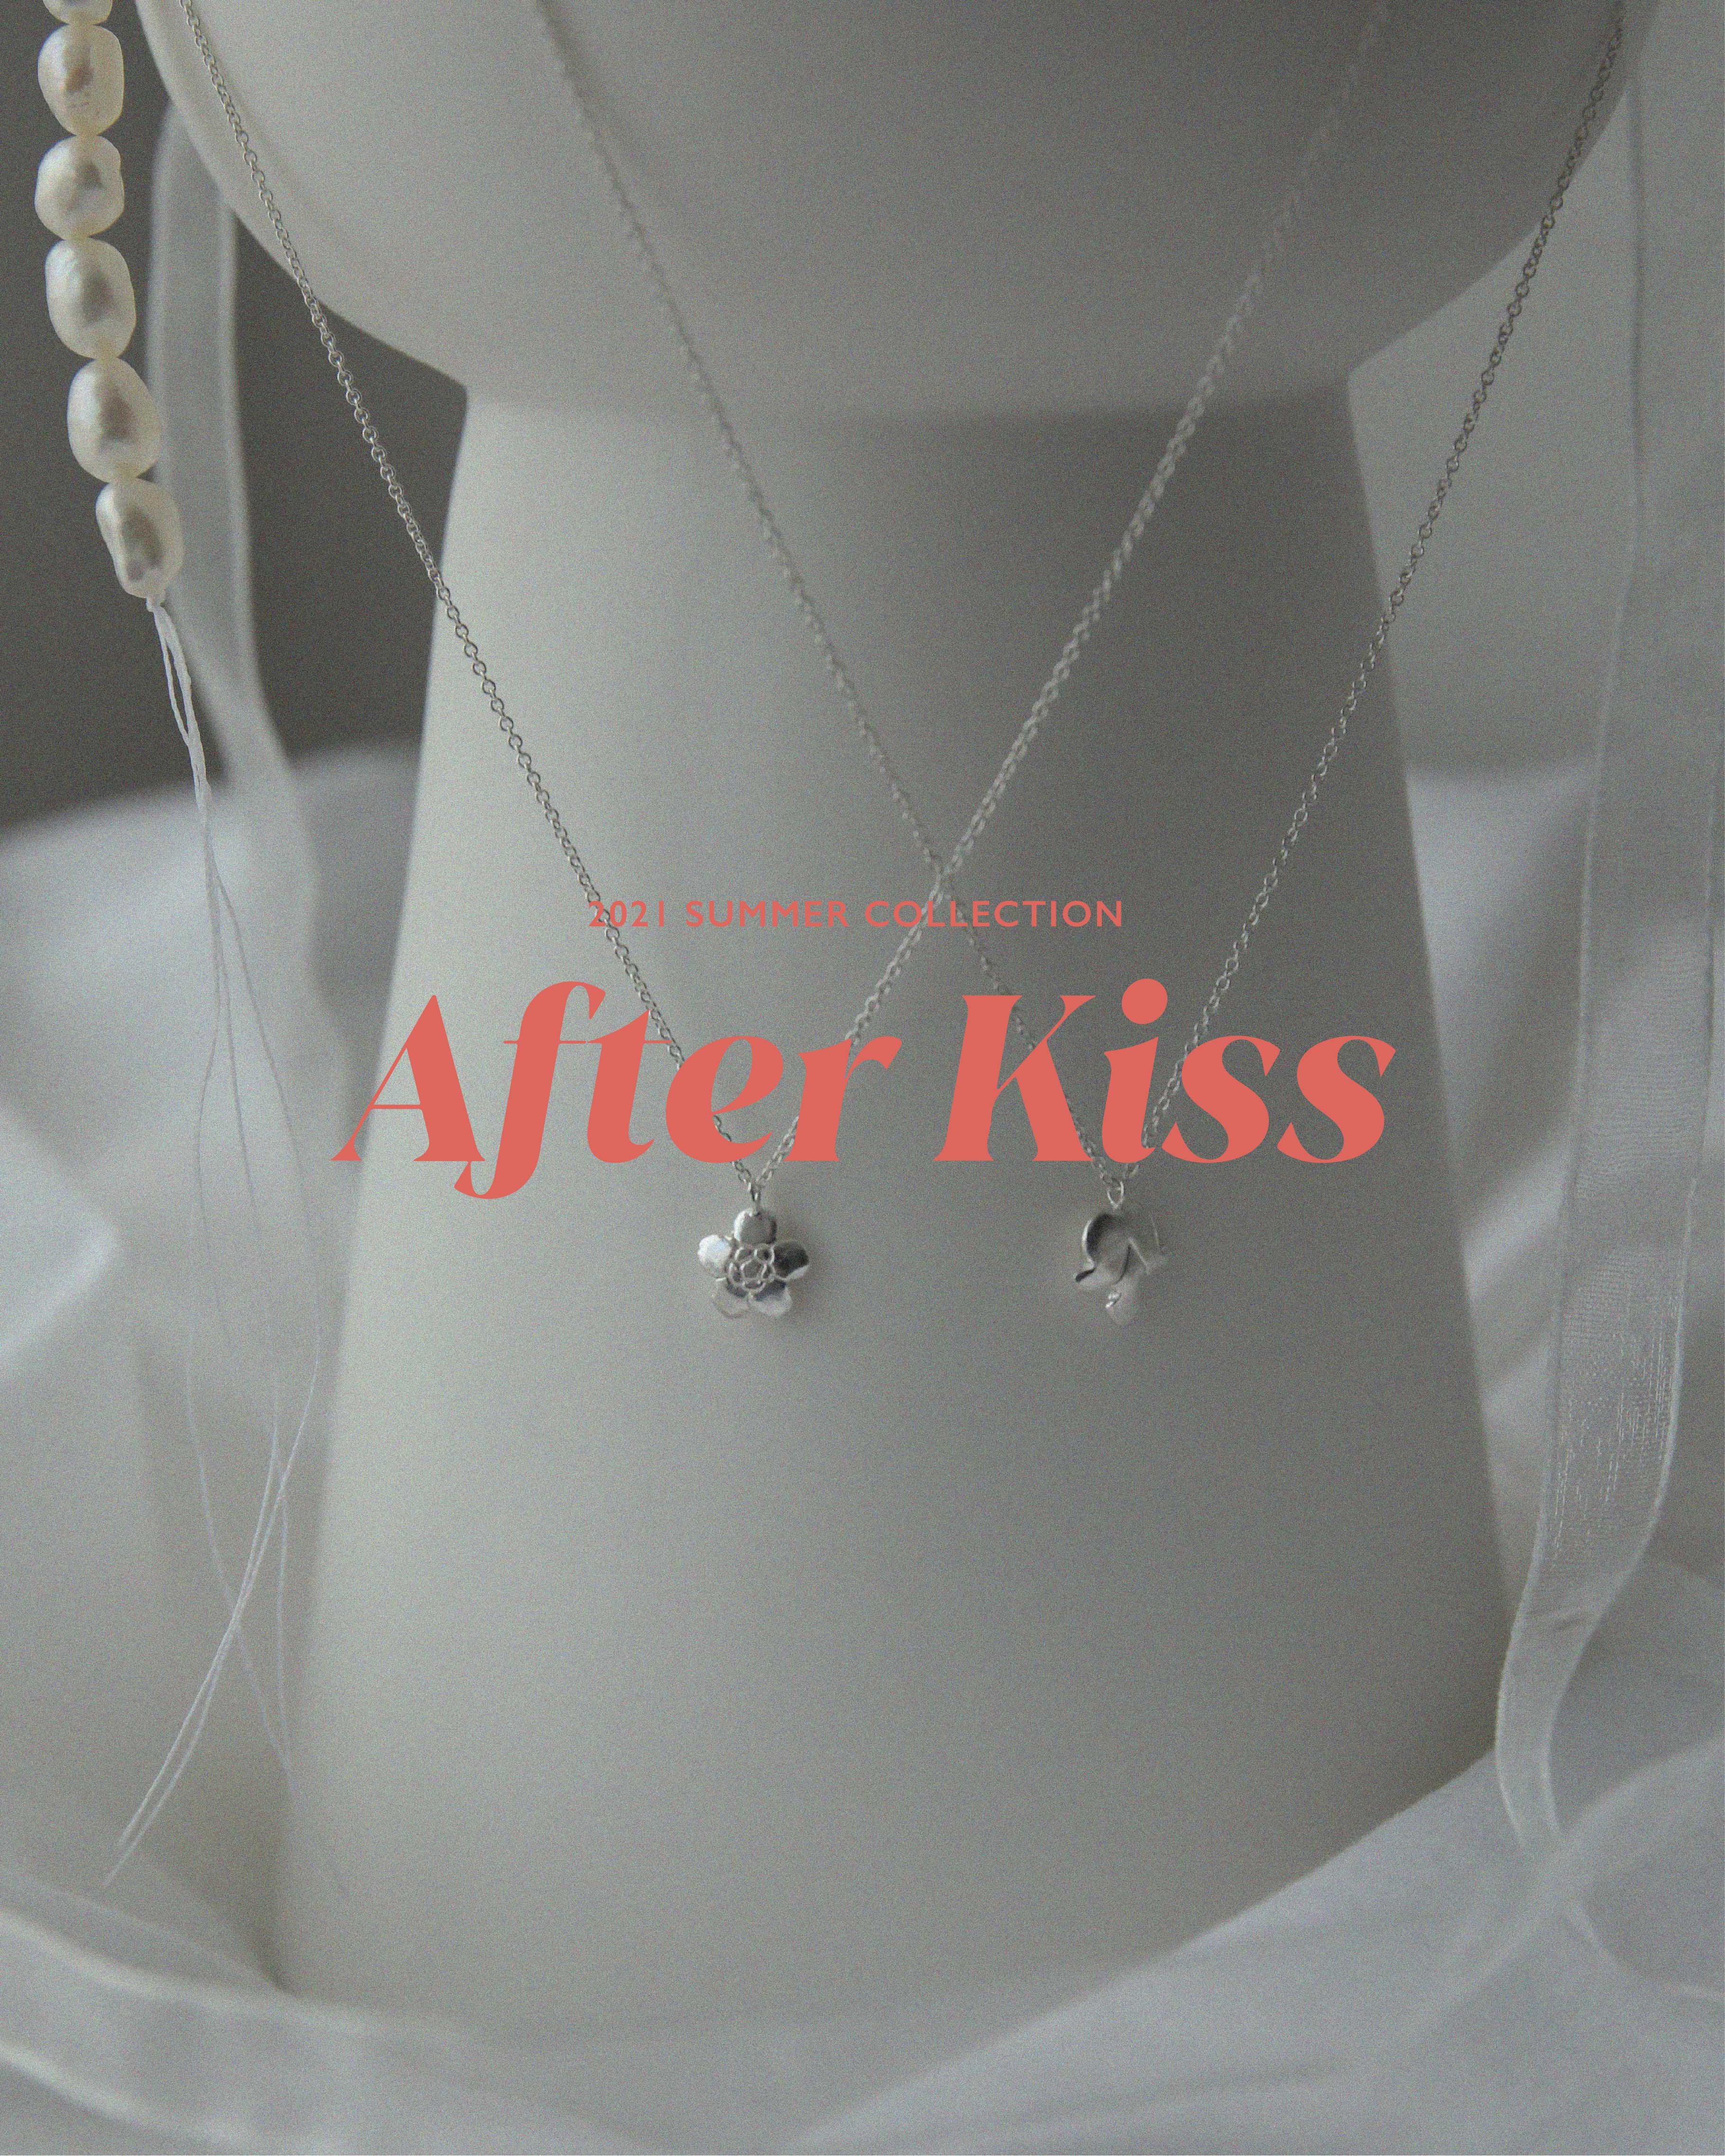 AFTER KISS